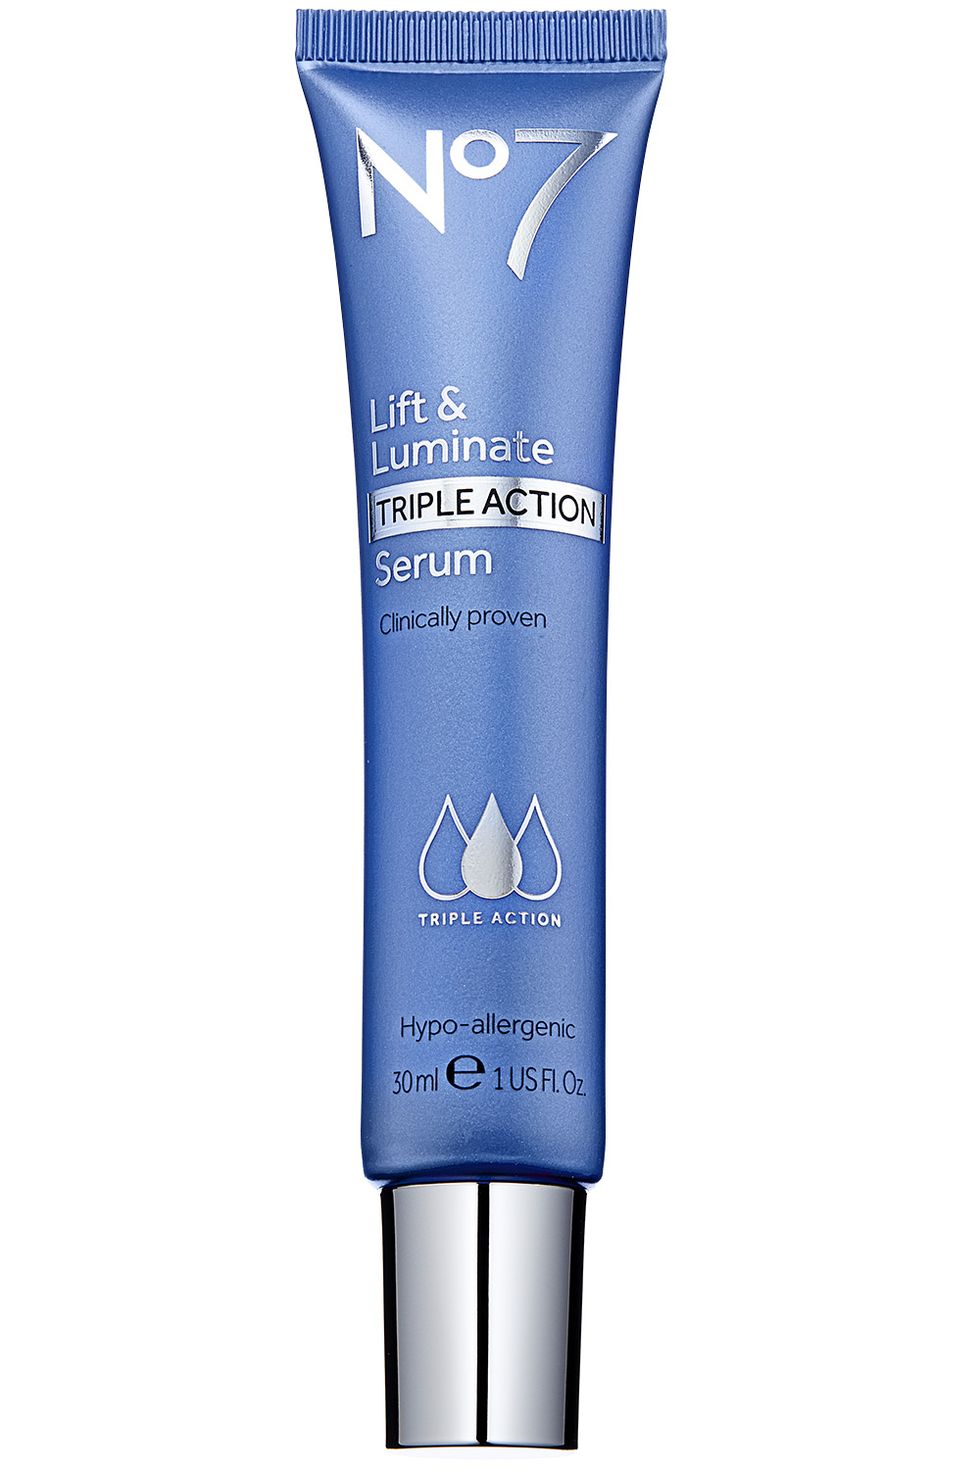 <p><a href="http://www.ulta.com/lift-luminate-triple-action-serum?productId=xlsImpprod15321241" target="_blank" data-tracking-id="recirc-text-link">No7 Lift &amp; Luminate&nbsp;Triple Action Serum</a>&nbsp;($34) "is made&nbsp;for people with skin&nbsp;types that can't&nbsp;tolerate standard&nbsp;retinol," explains&nbsp;Mike Bell, chief&nbsp;scientific skin-care&nbsp;adviser at No7. It's&nbsp;made with retinyl&nbsp;palmitate, which is&nbsp;mild but still&nbsp;softens fine lines.</p>